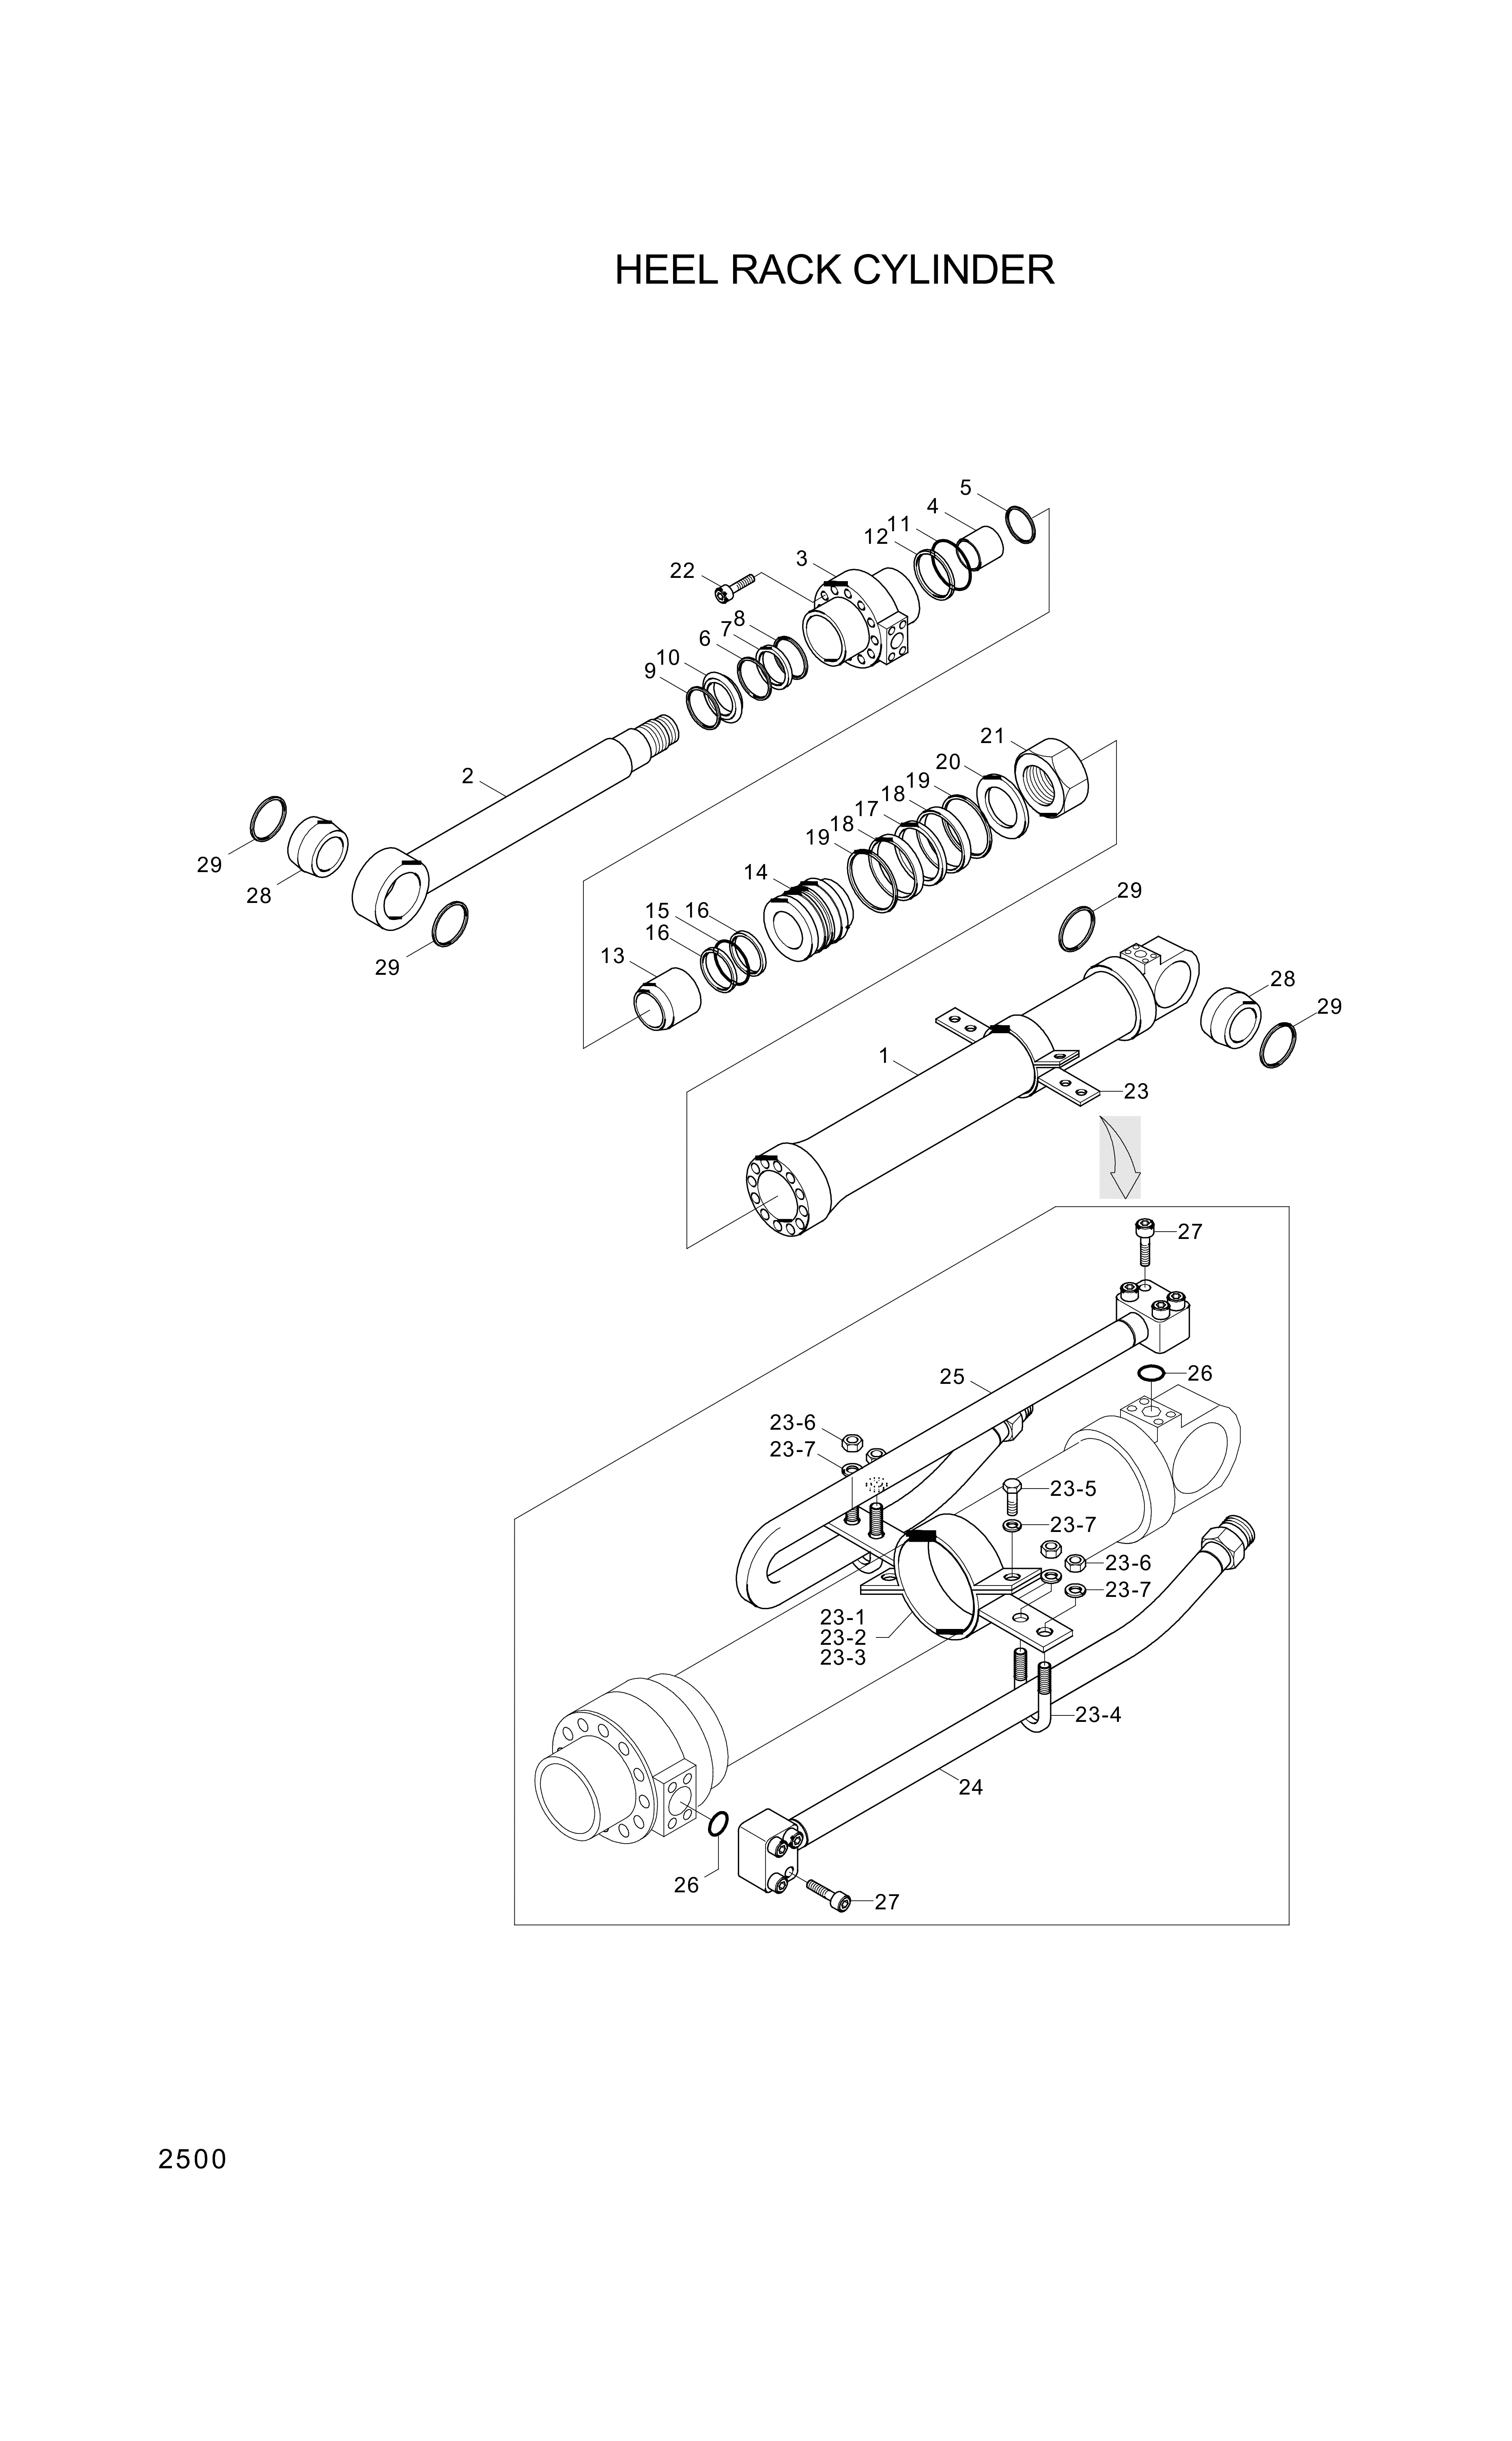 drawing for Hyundai Construction Equipment 161-38 - SEAL-DUST (figure 5)